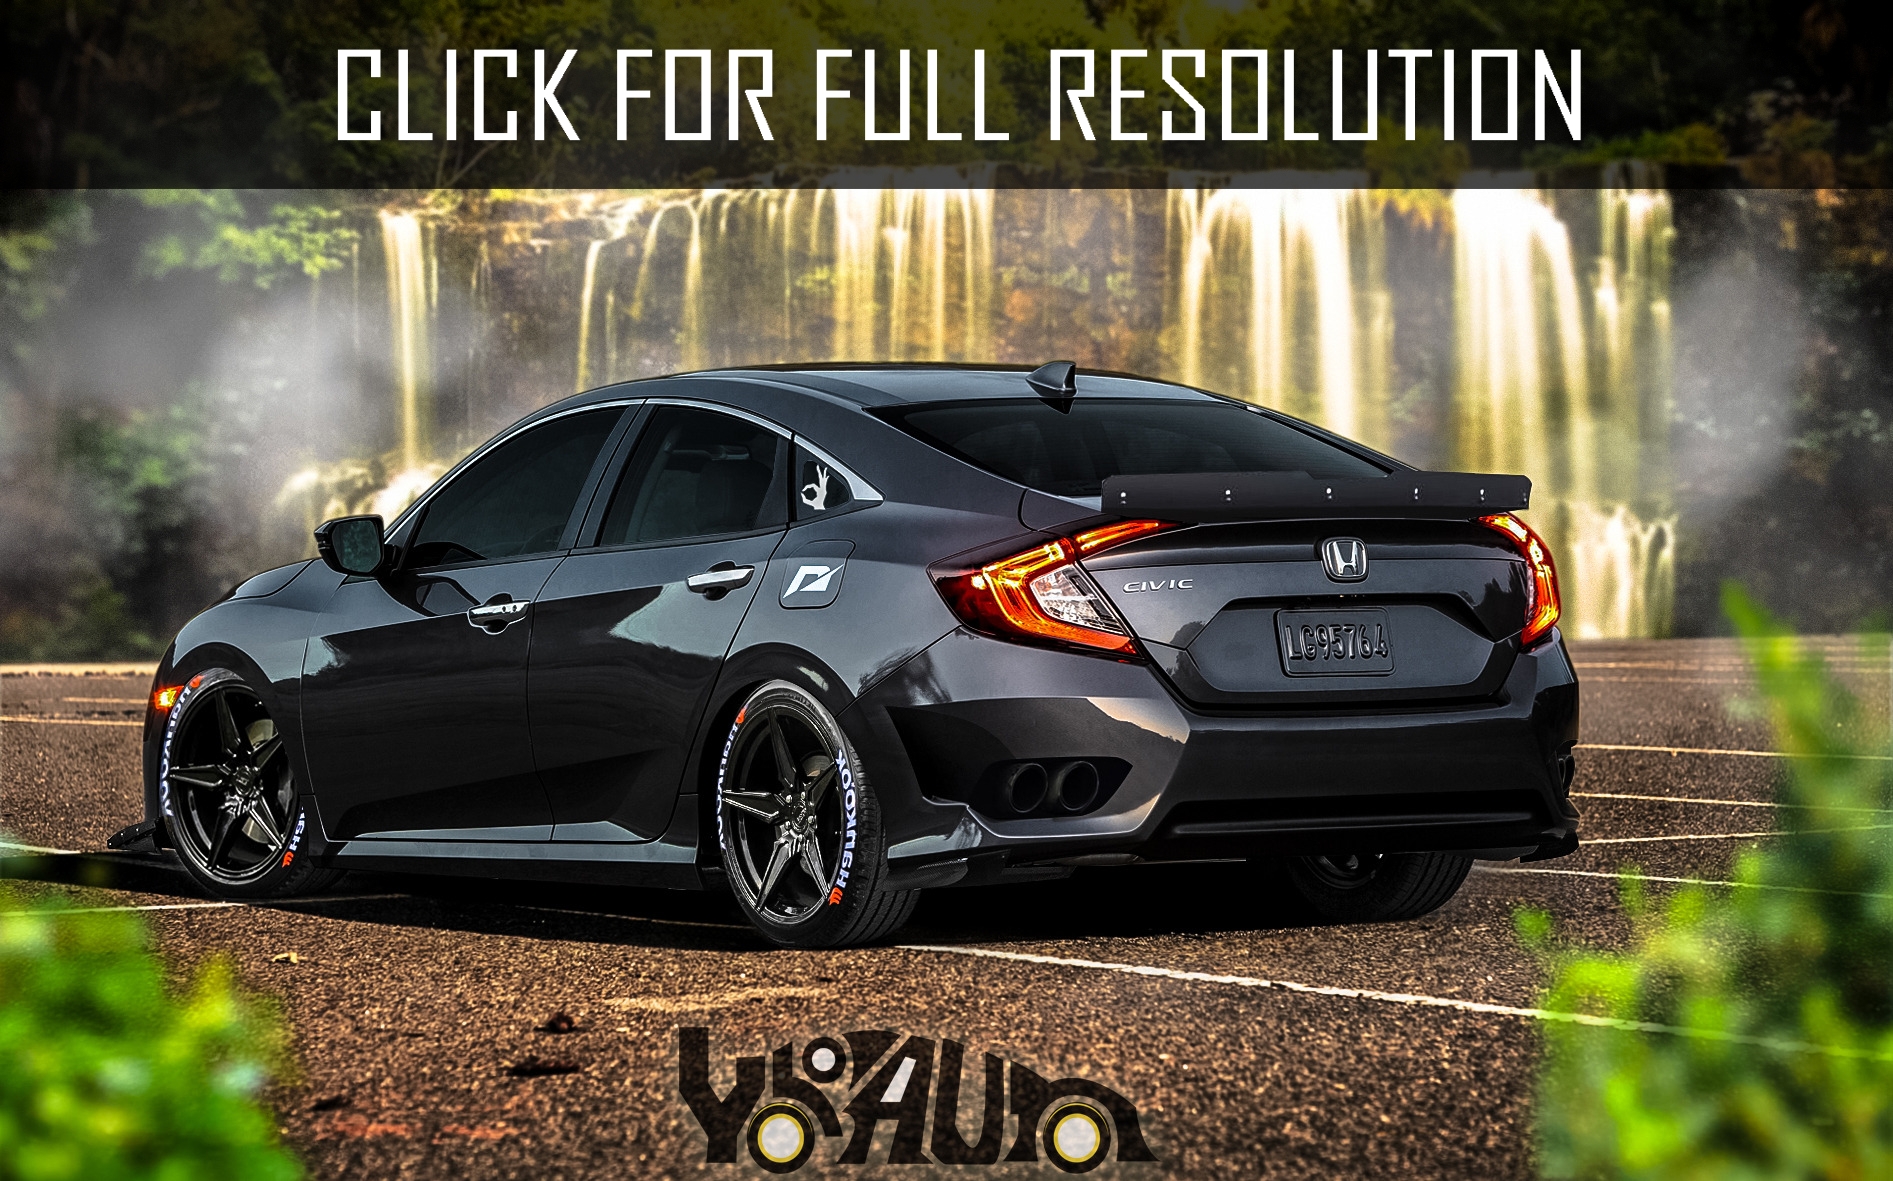 Honda Civic Modified amazing photo gallery, some information and